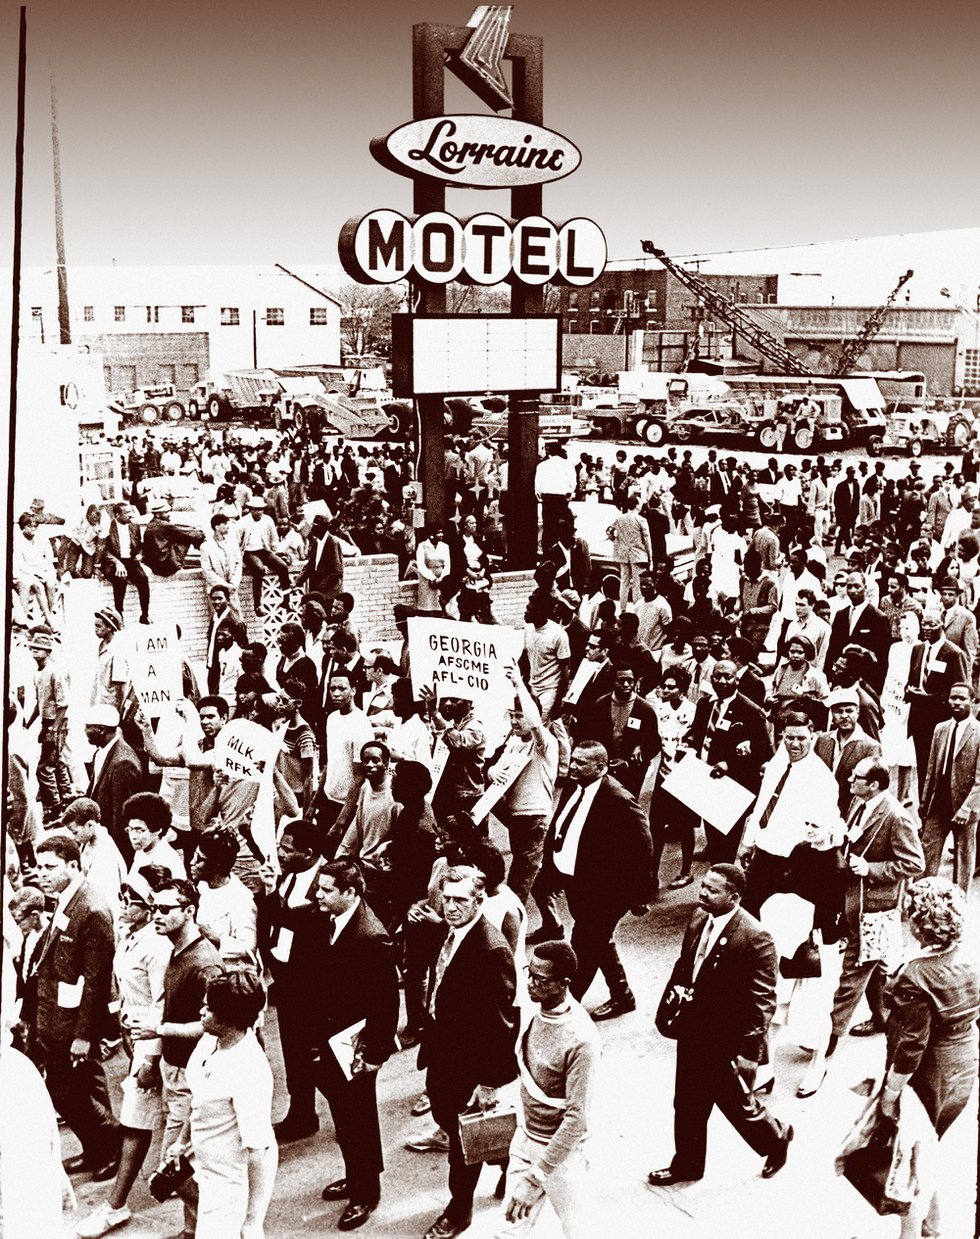 A few weeks after King’s death, thousands — some still carrying “I Am a Man” signs —  attended a rally in the parking lot of the Lorraine Motel. 